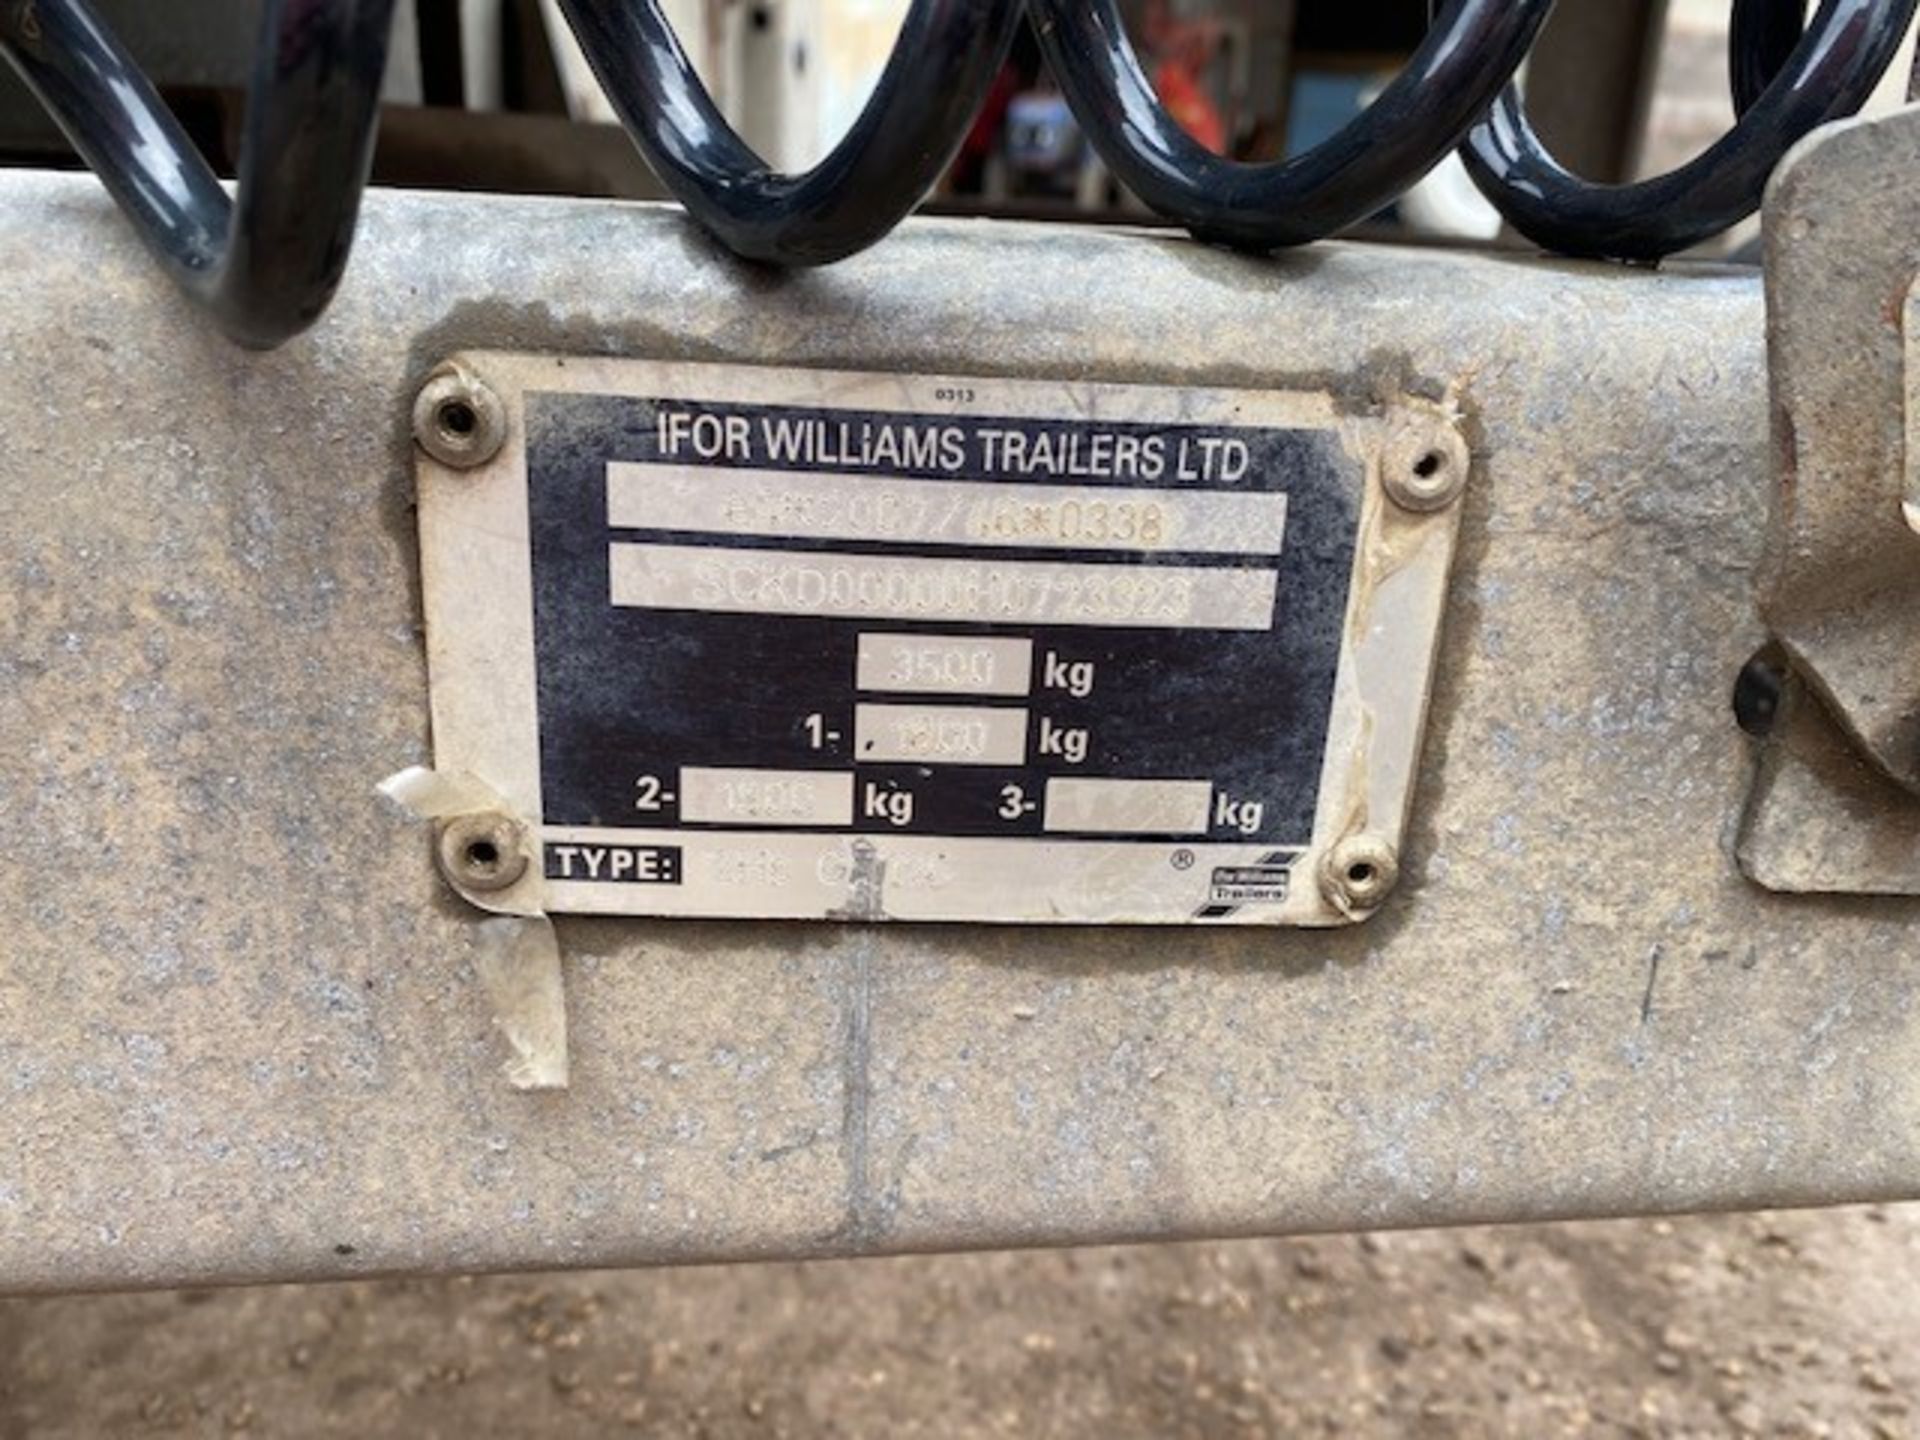 Ifor Williams 12 x 6 Plant Trailer, One Owner From New, Ball Hitch, Good Trailer All Round*PLUS VAT* - Image 8 of 10